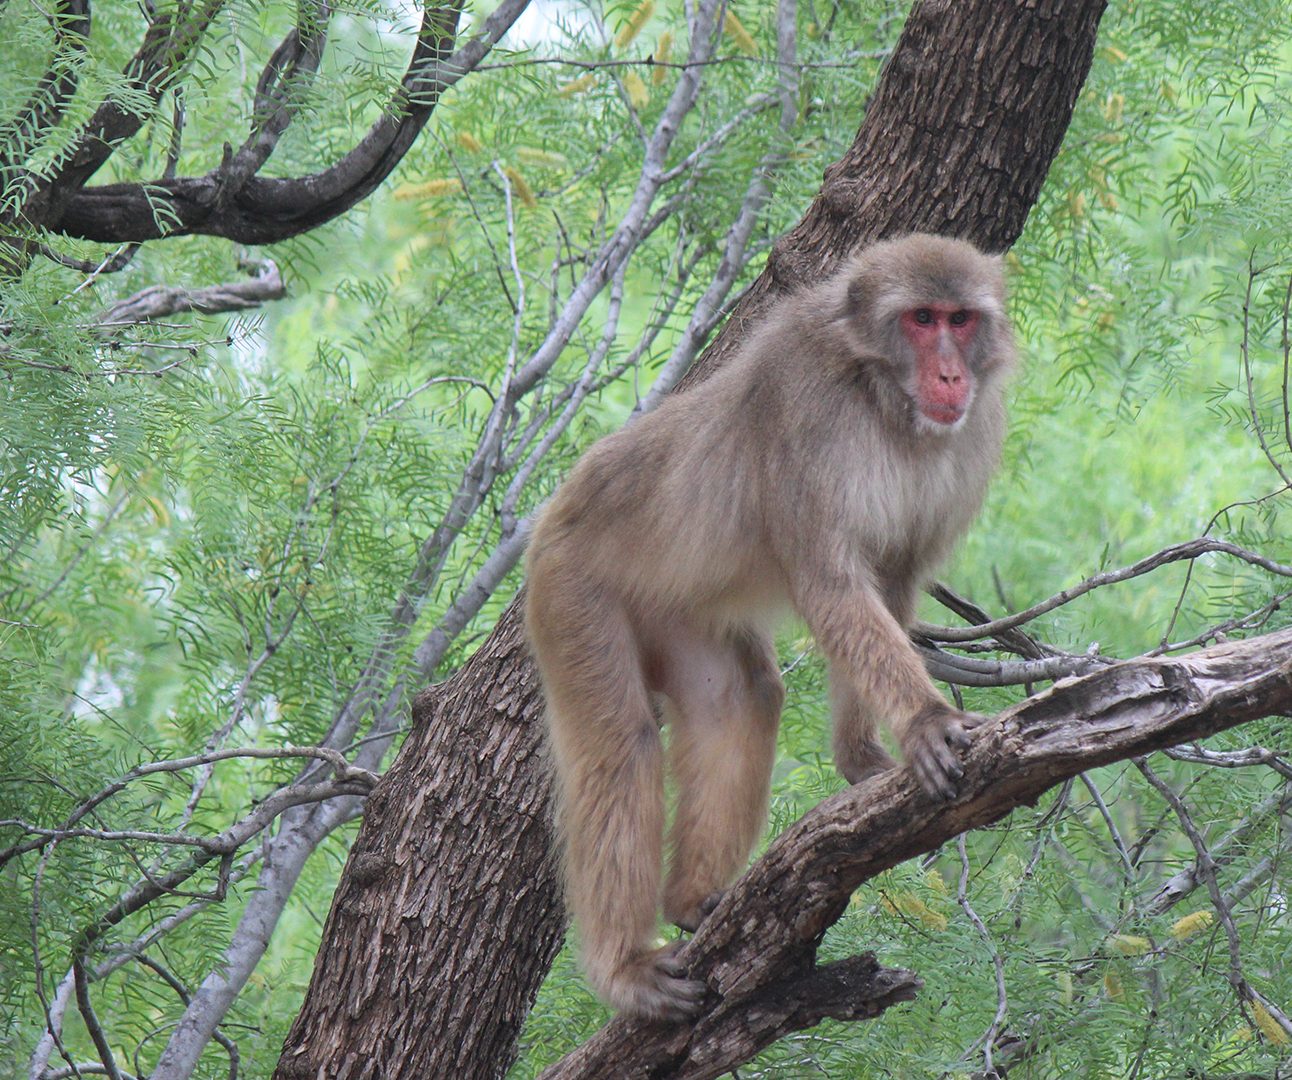 A monkey is sitting in the branch of a tree, looking towards the camera